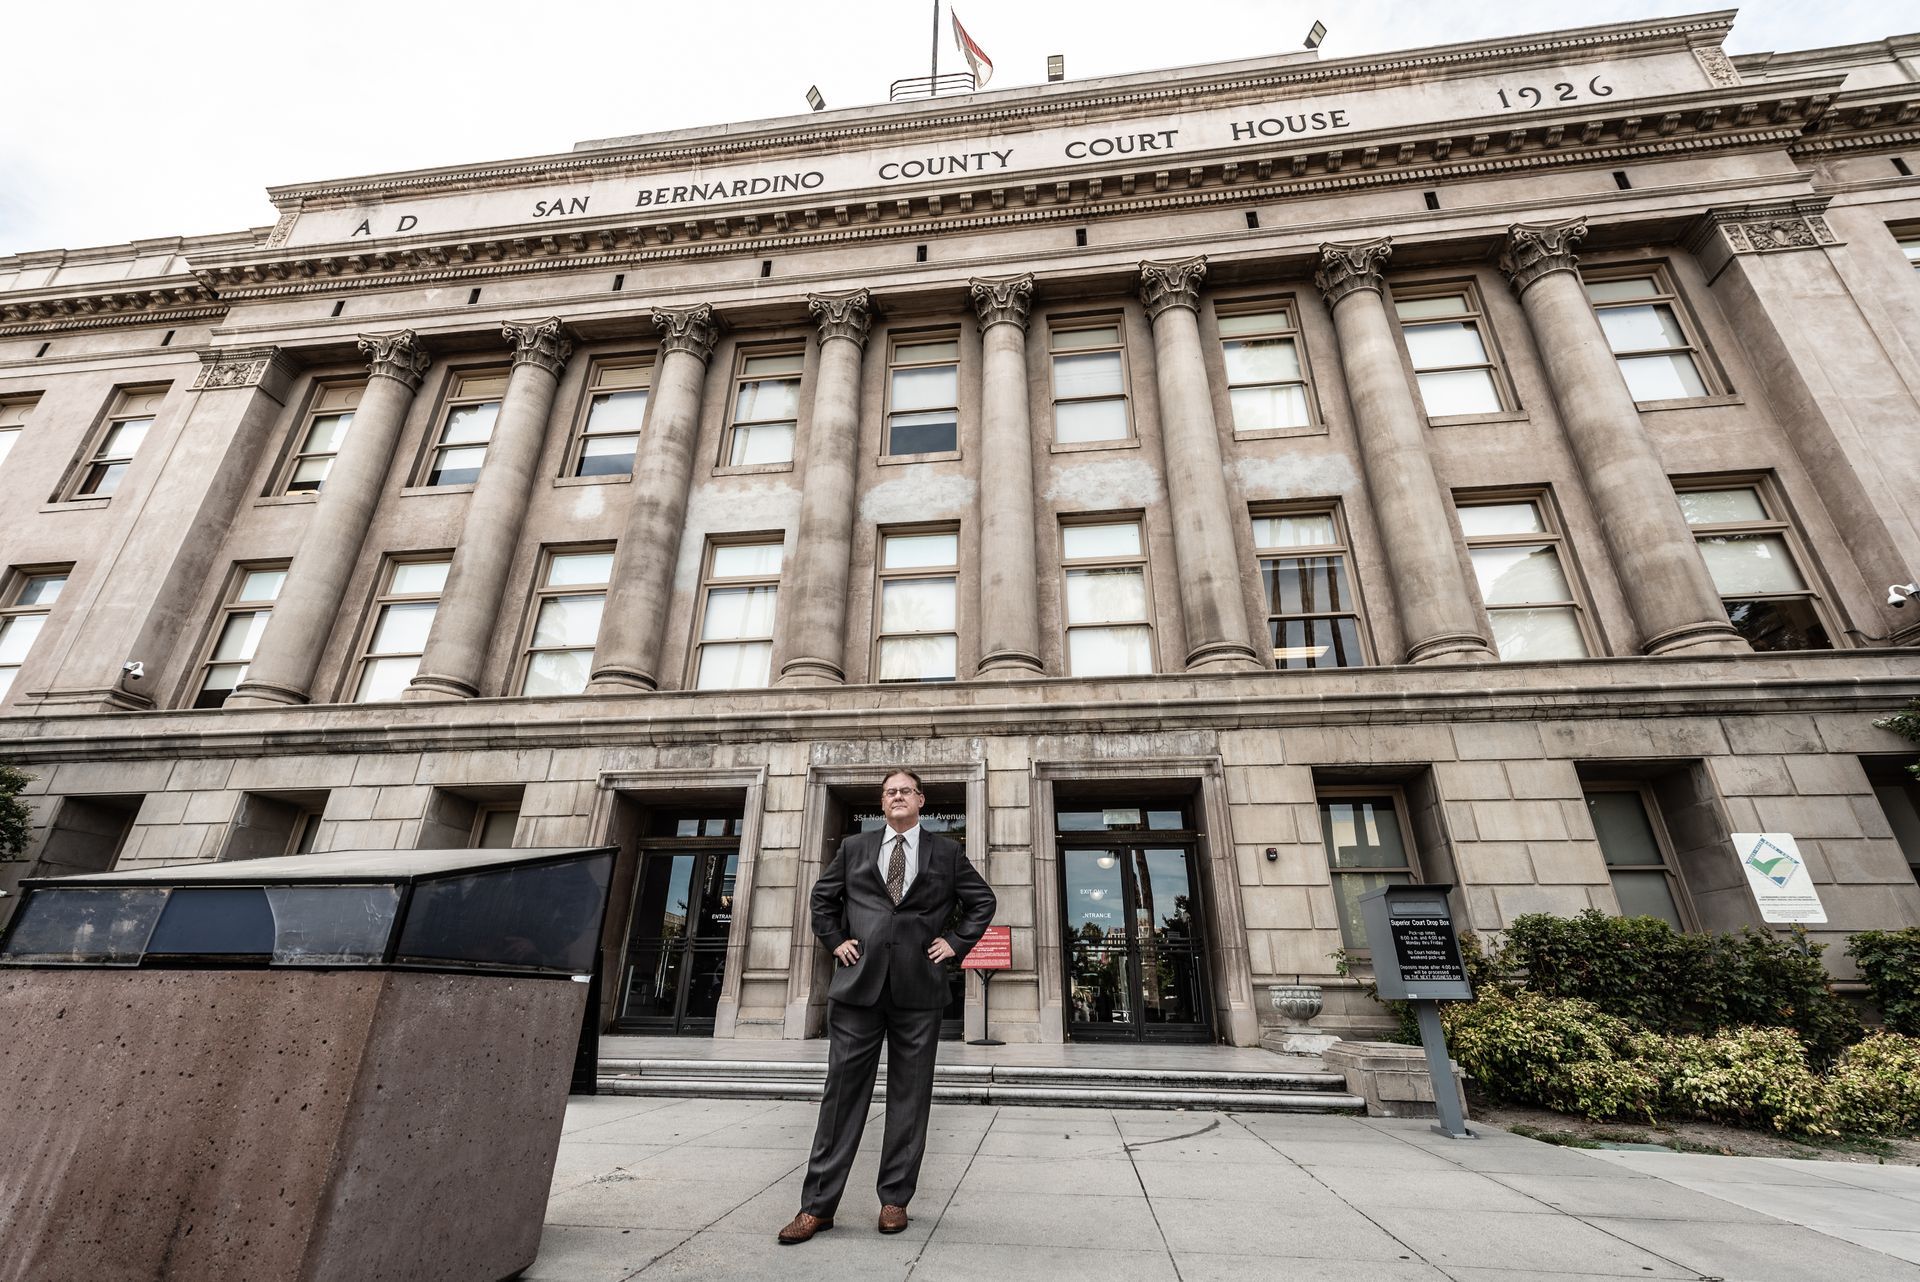 DUI Attorney Greg Kassel stands in front of the San Bernardino county court house